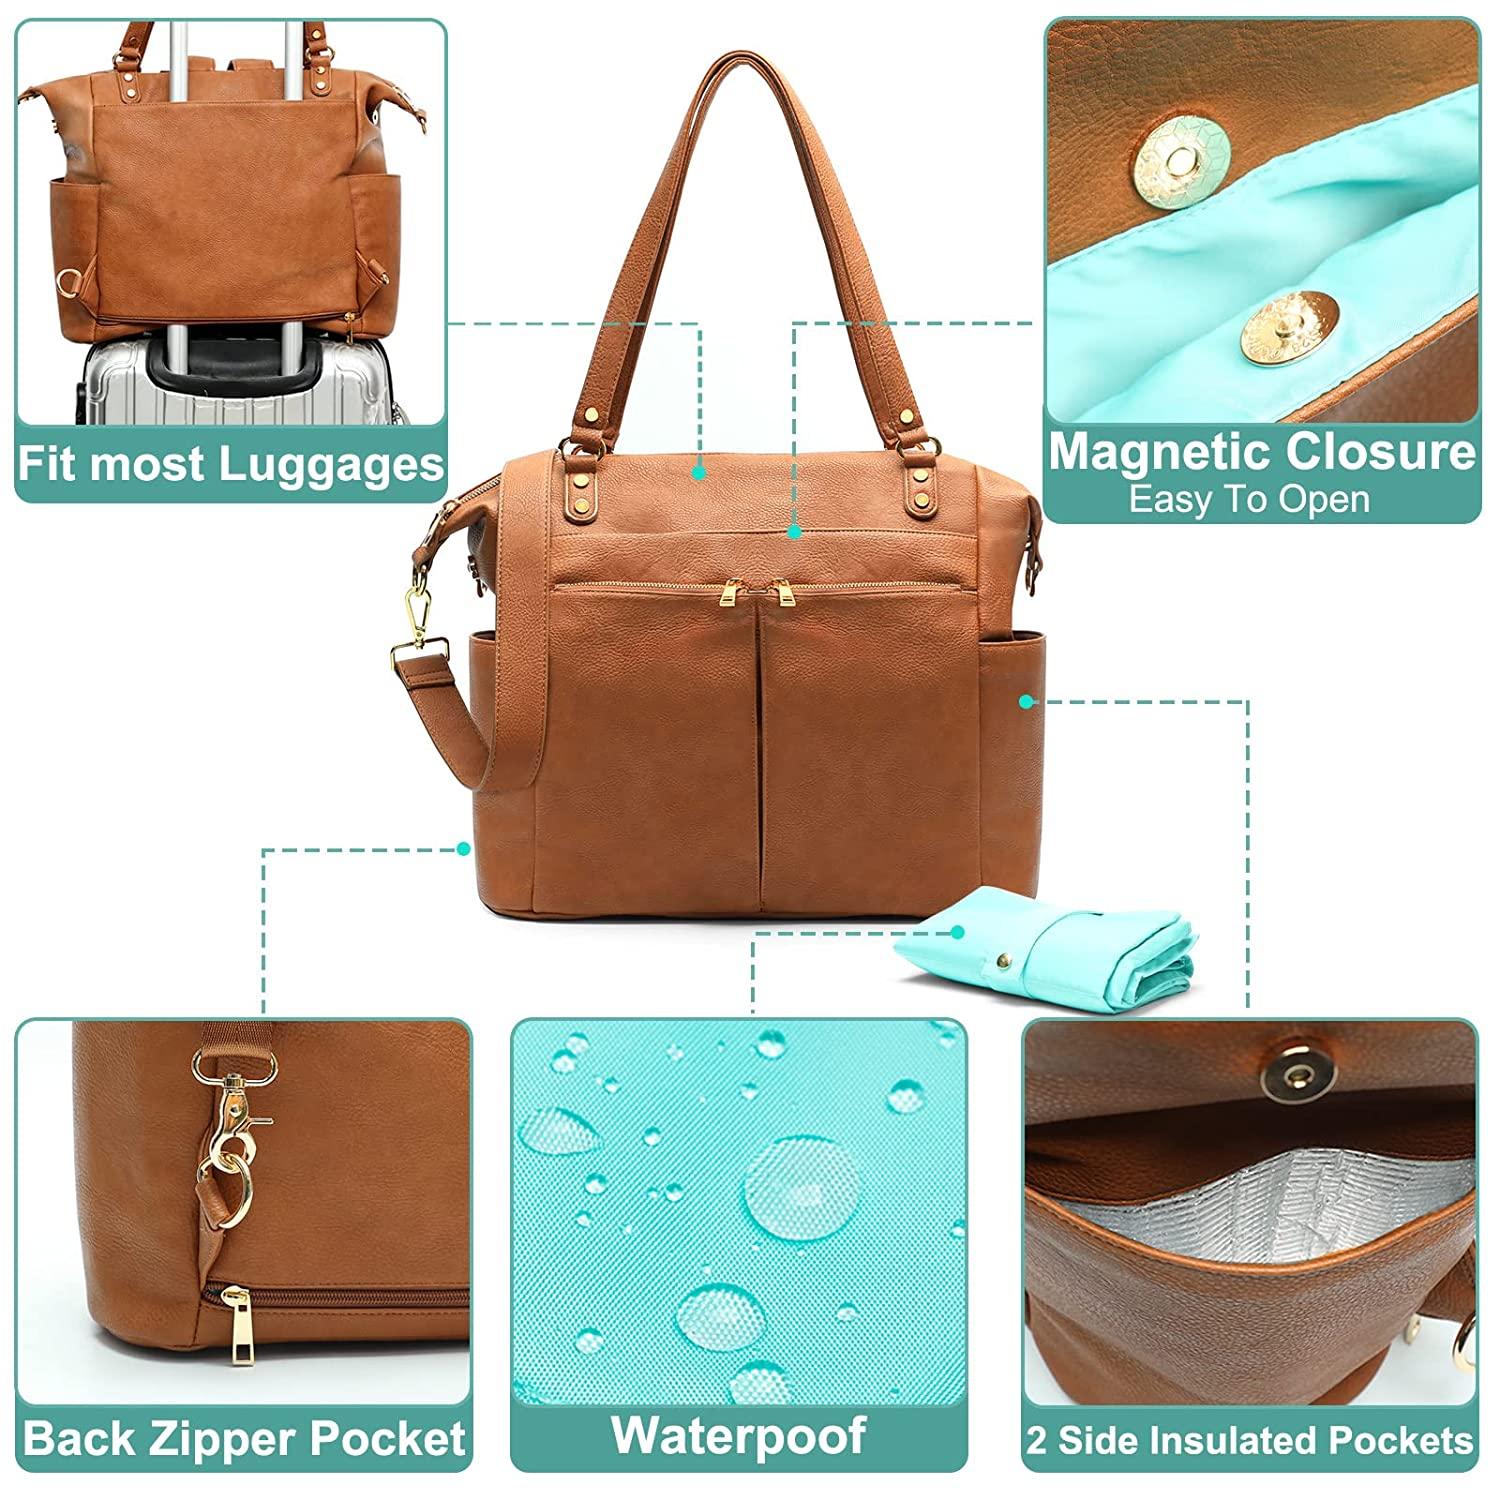 Leather Diaper Bag by miss fong,Diaper Bag Backpack, Baby Bag